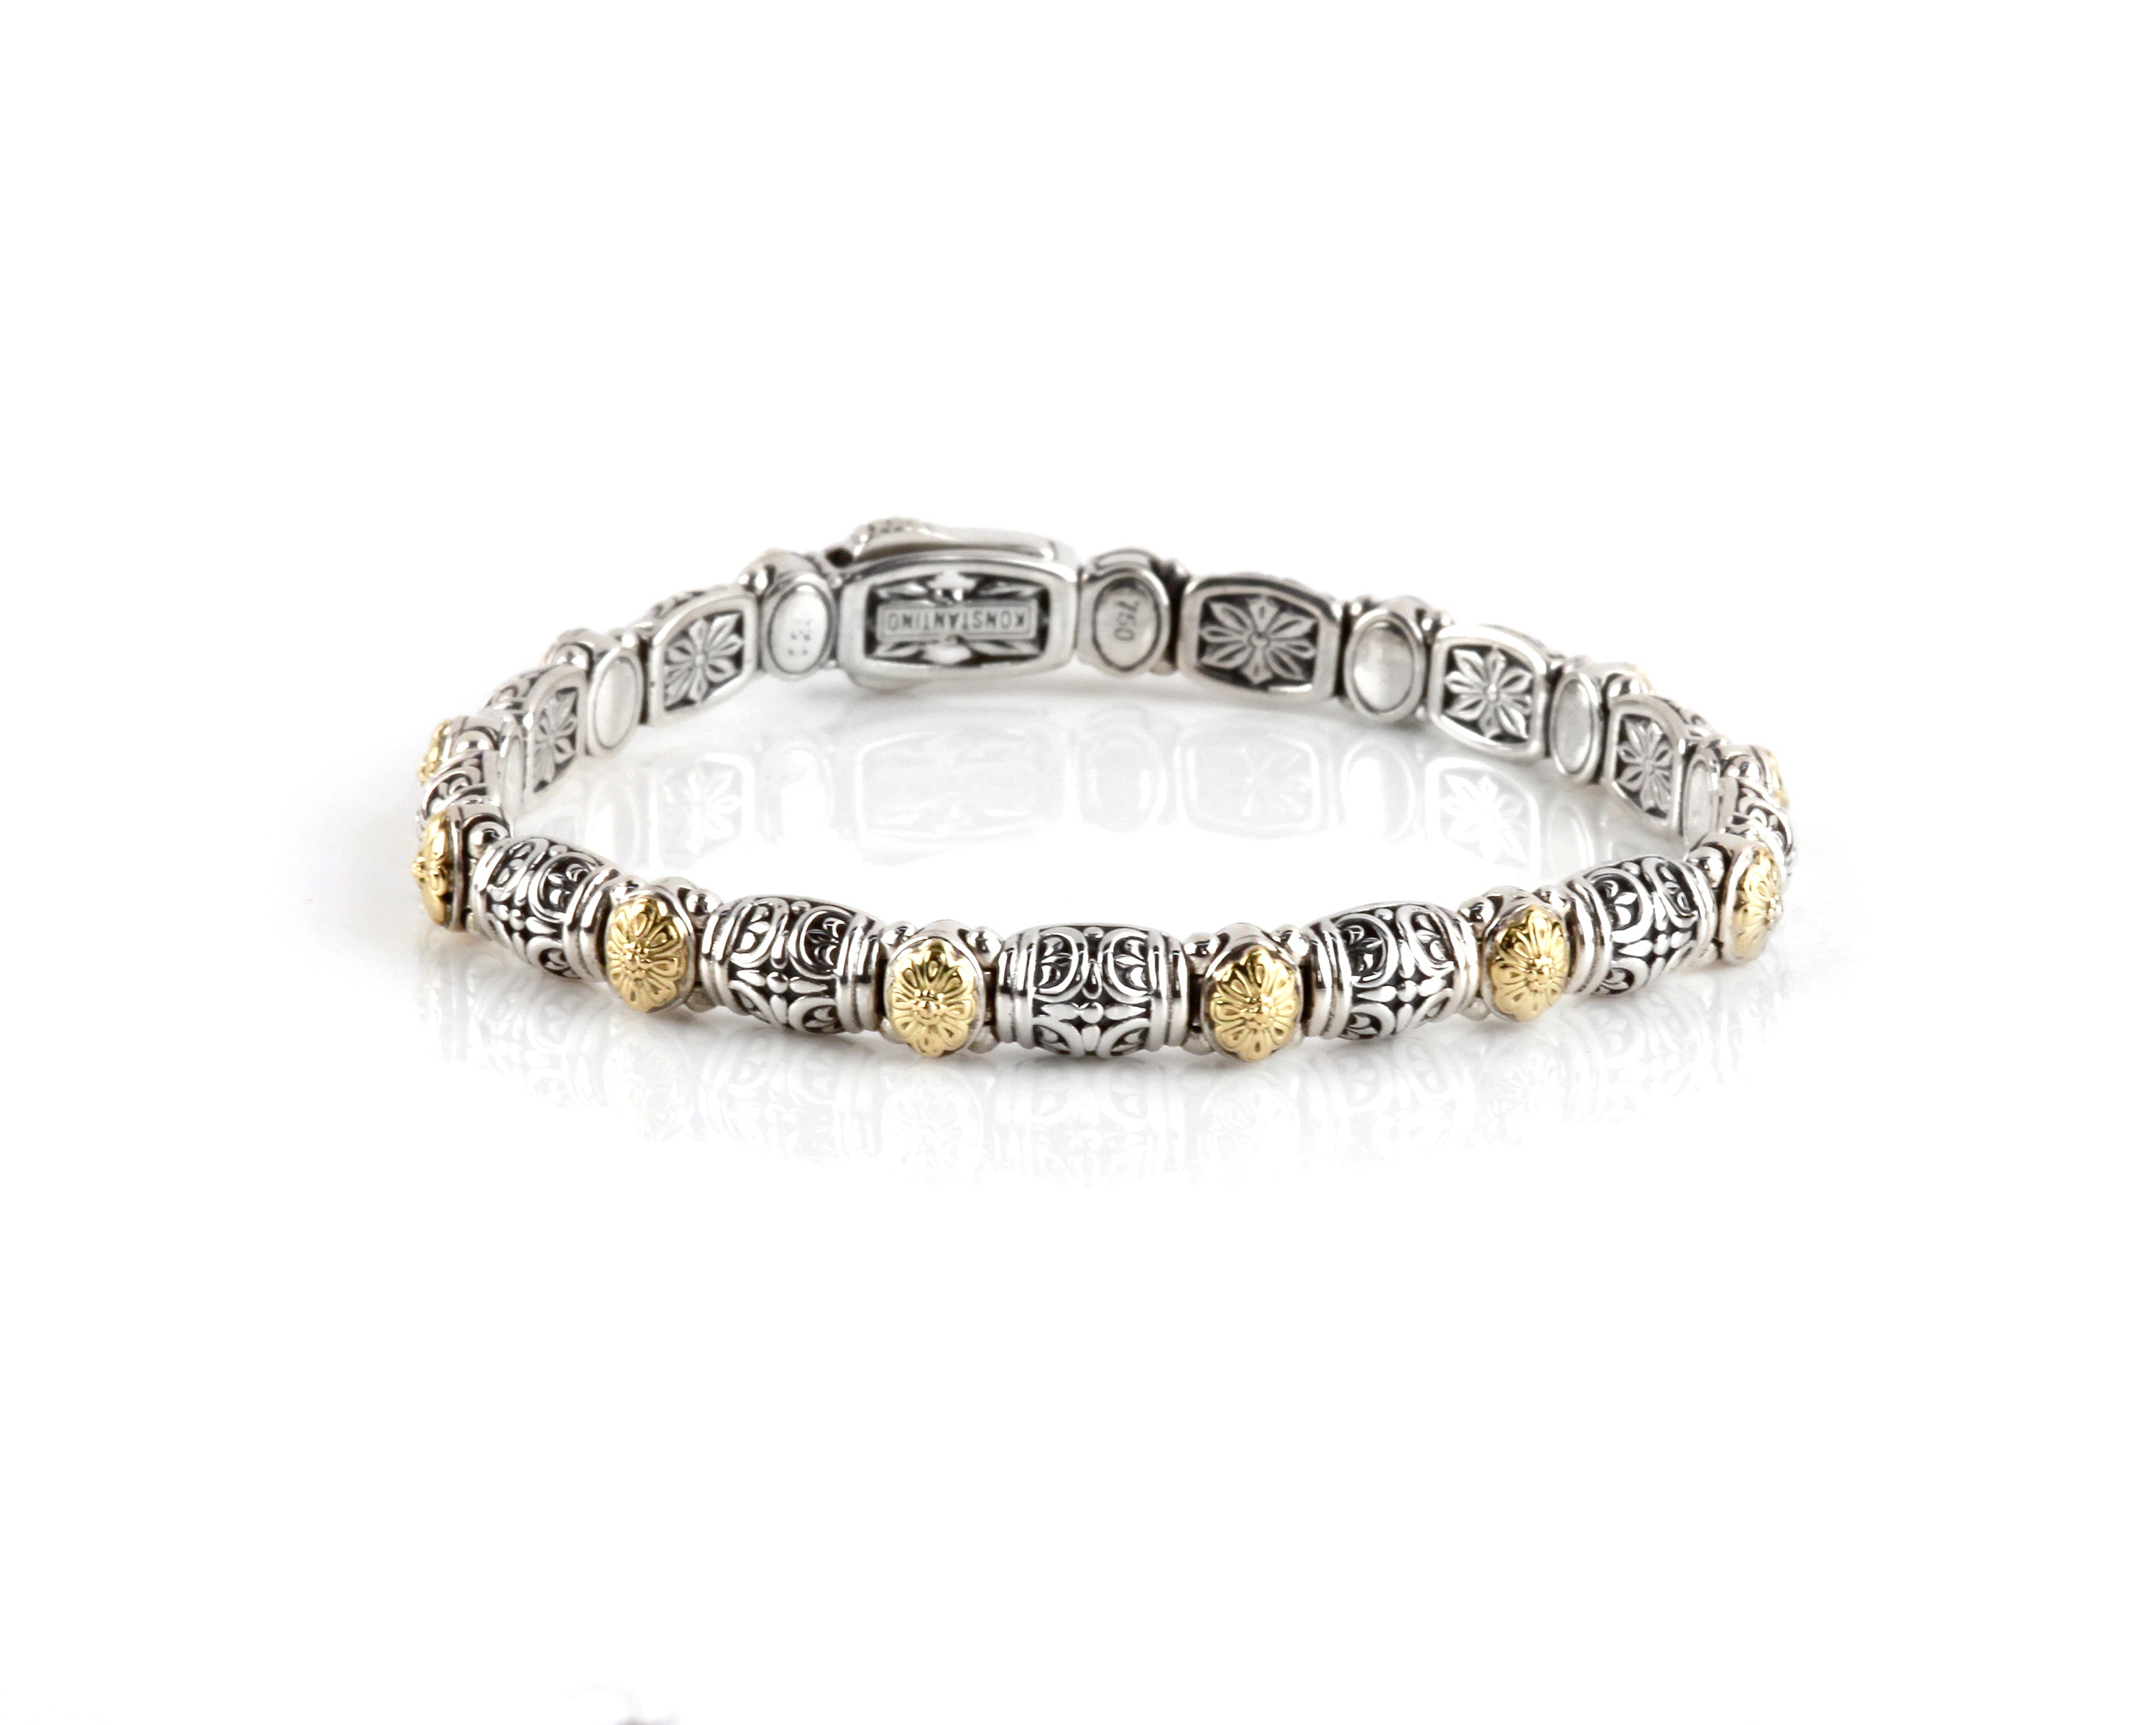 KONSTANTINO STERLING SILVER & 18K GOLD DOTTED CLASP BRACELET FROM THE HERMIONE COLLECTION